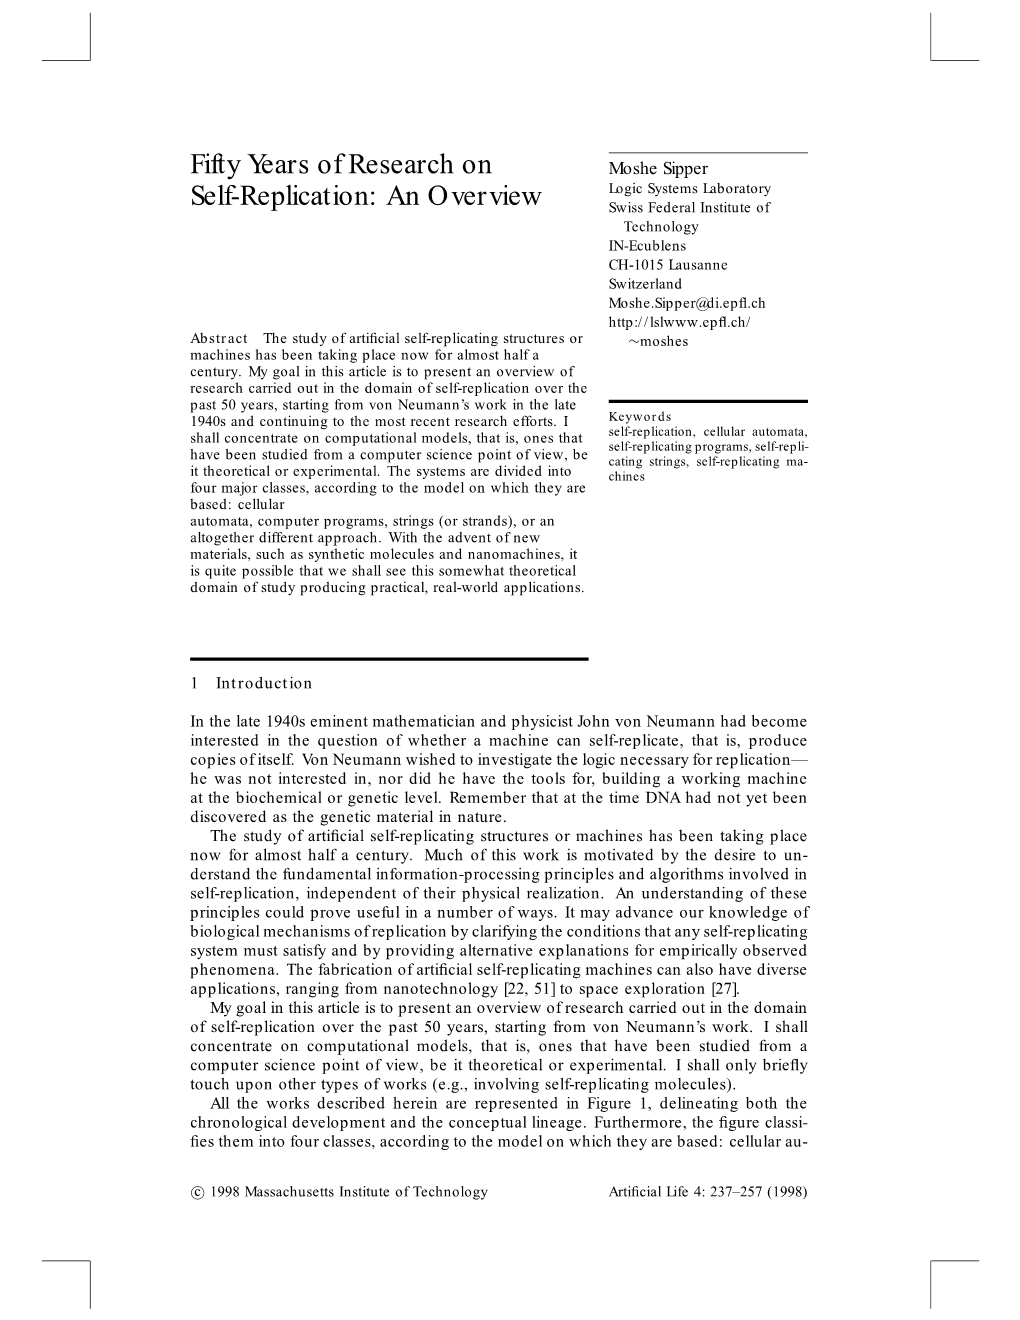 Fifty Years of Research on Self-Replication: an Overview